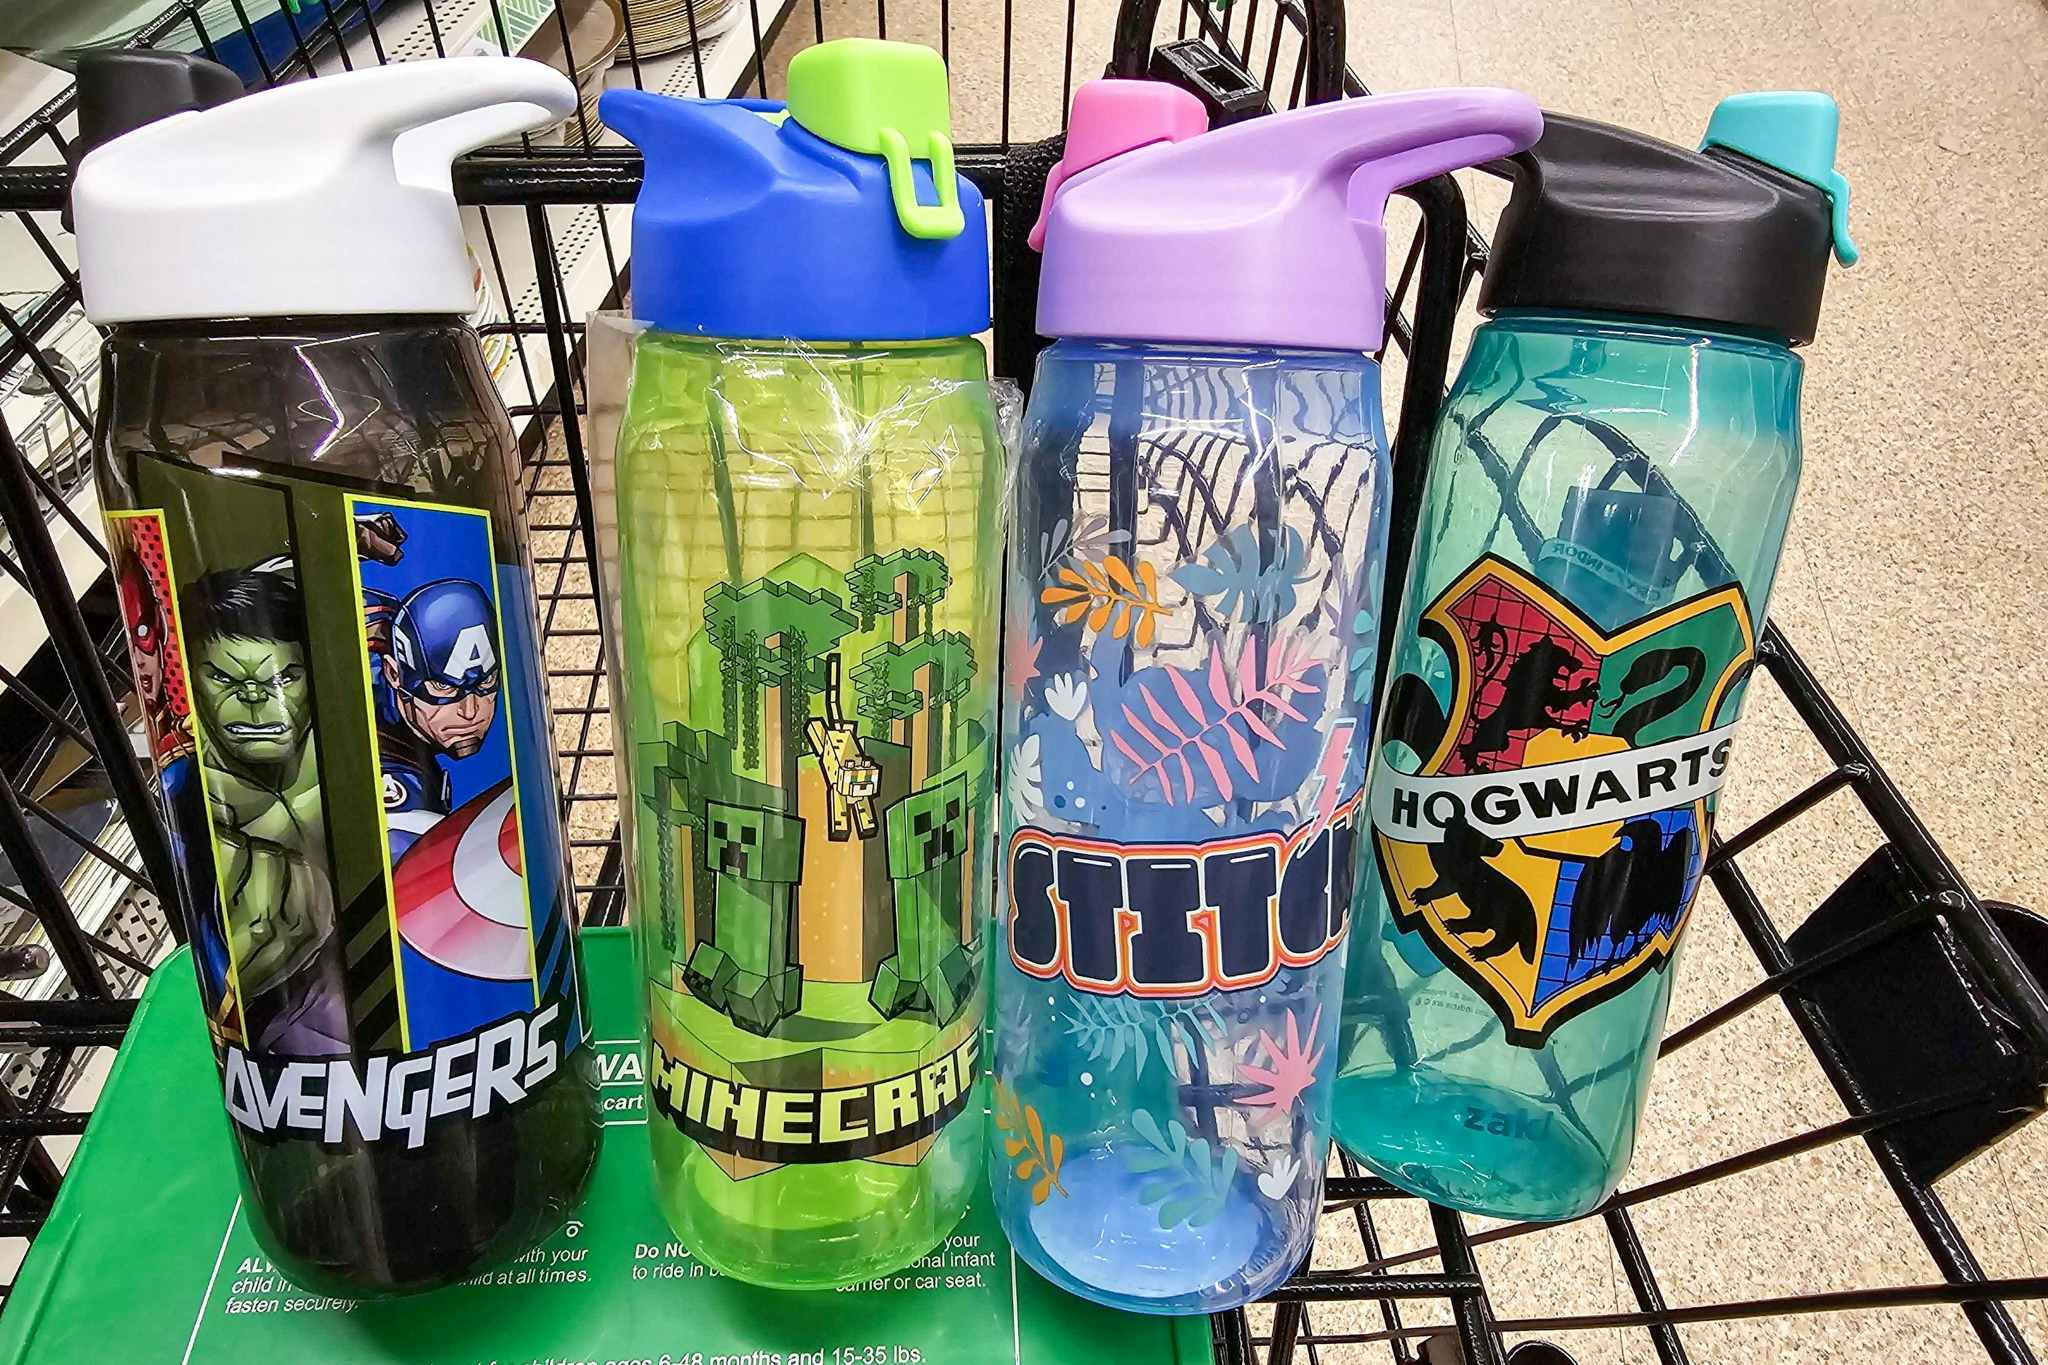 4 licensed character water bottles in a cart